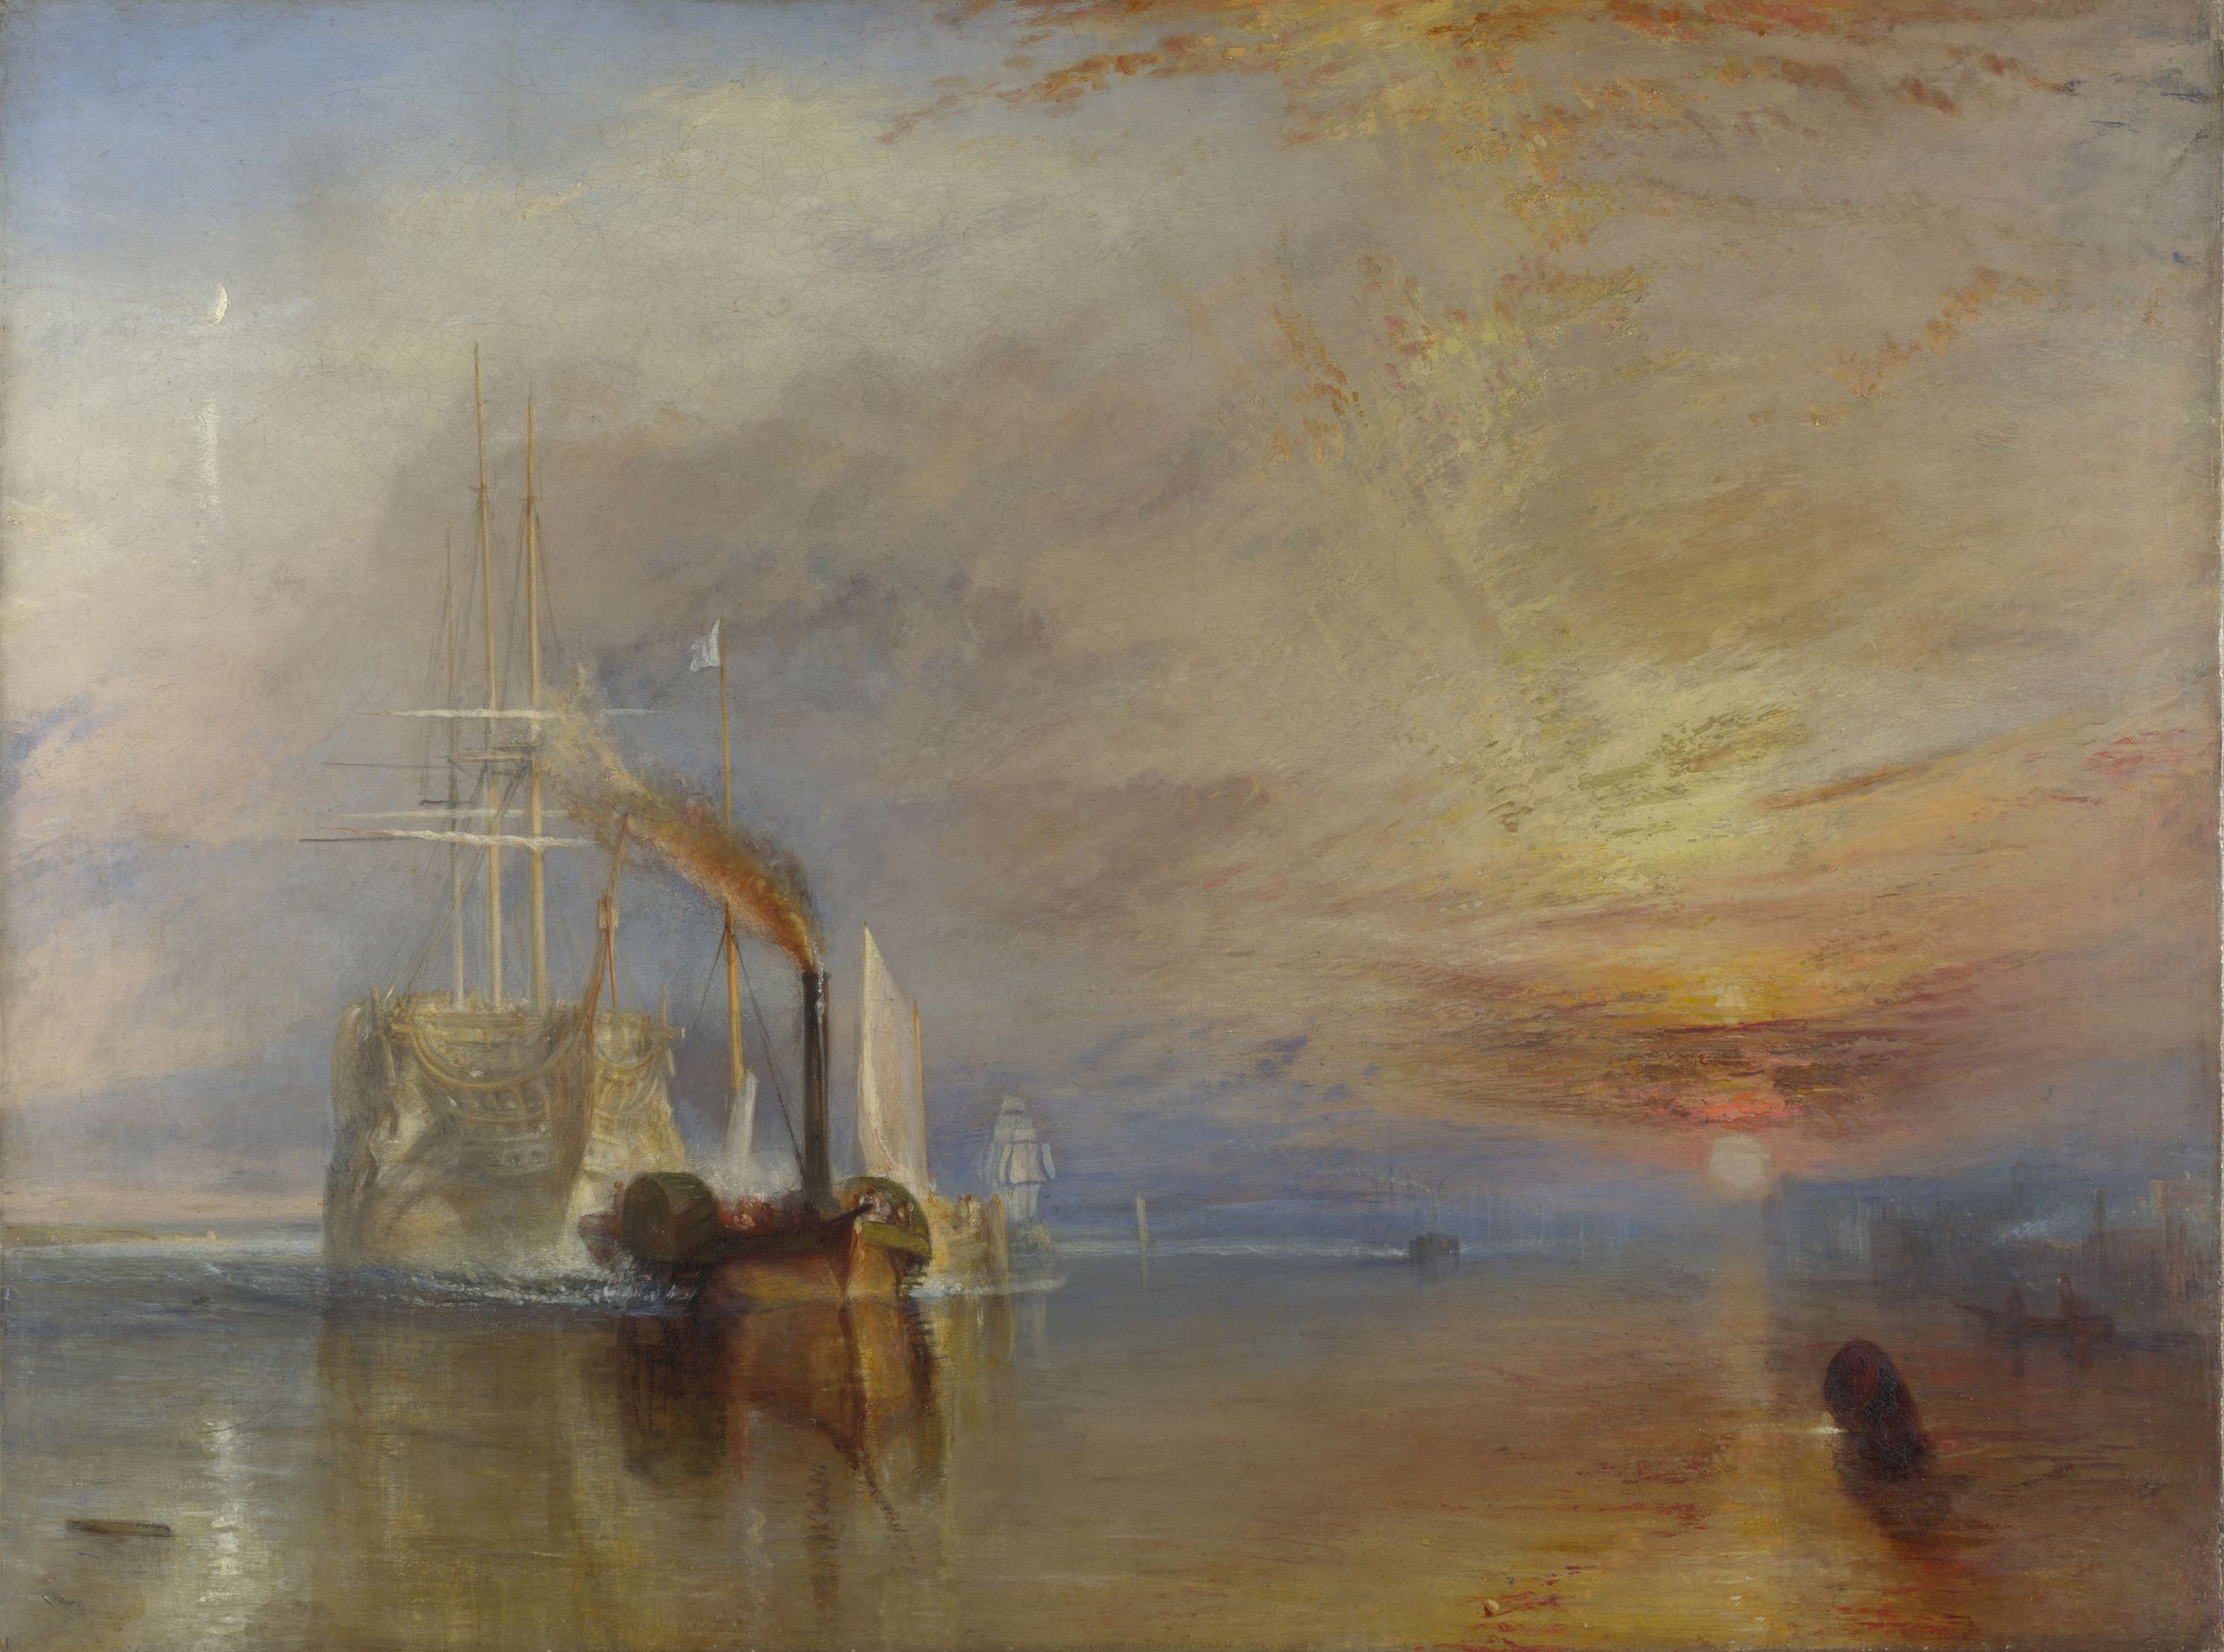 The Fighting Temeraire by Joseph Mallord William Turner - 1839 - 91 cm x 1.22 m National Gallery